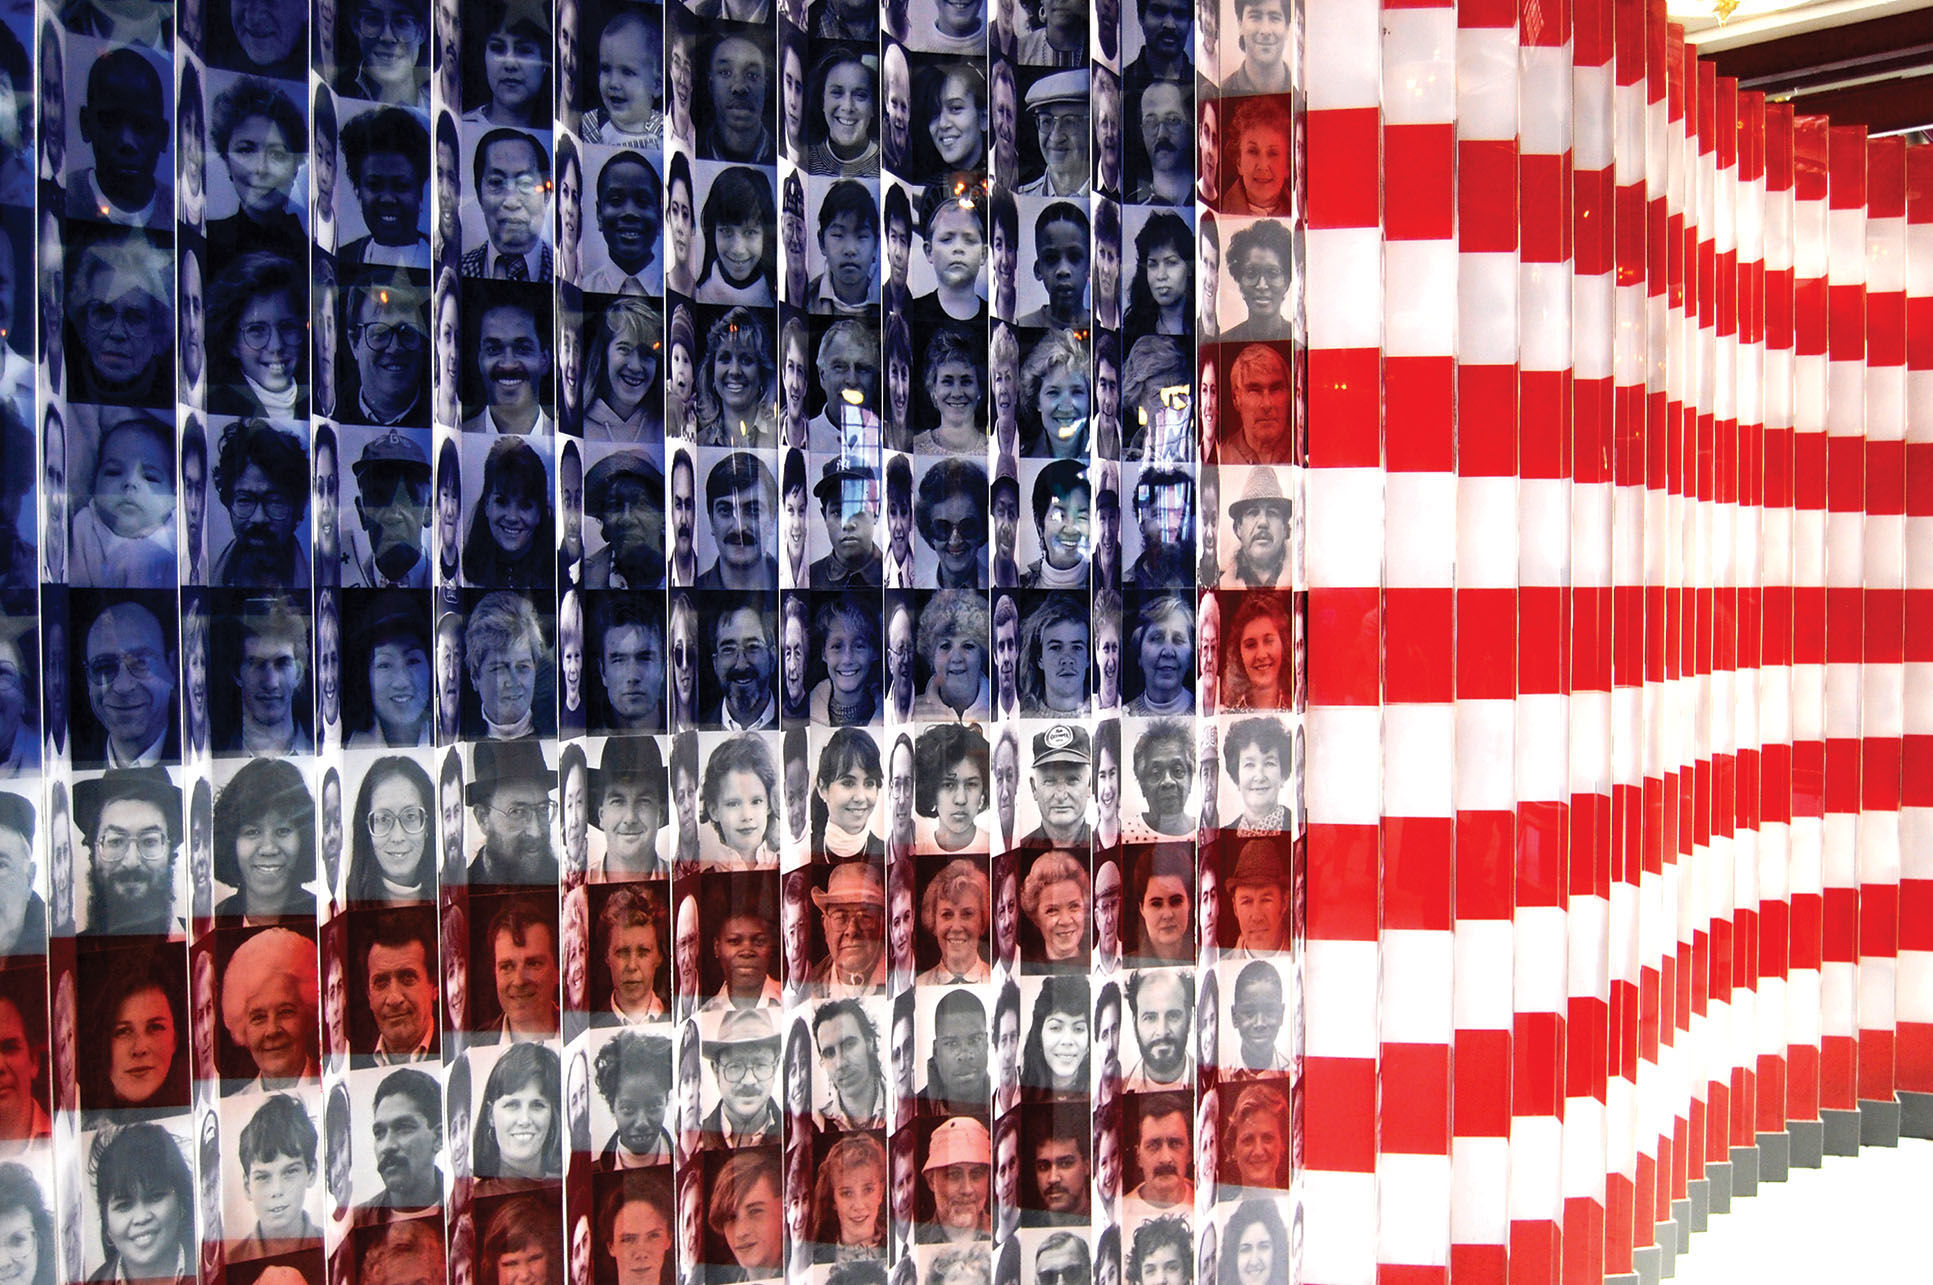 An  American flag with the faces of immigrants used to form part of the design on display at Ellis Island. (Photo by Ludovic Bertron.)